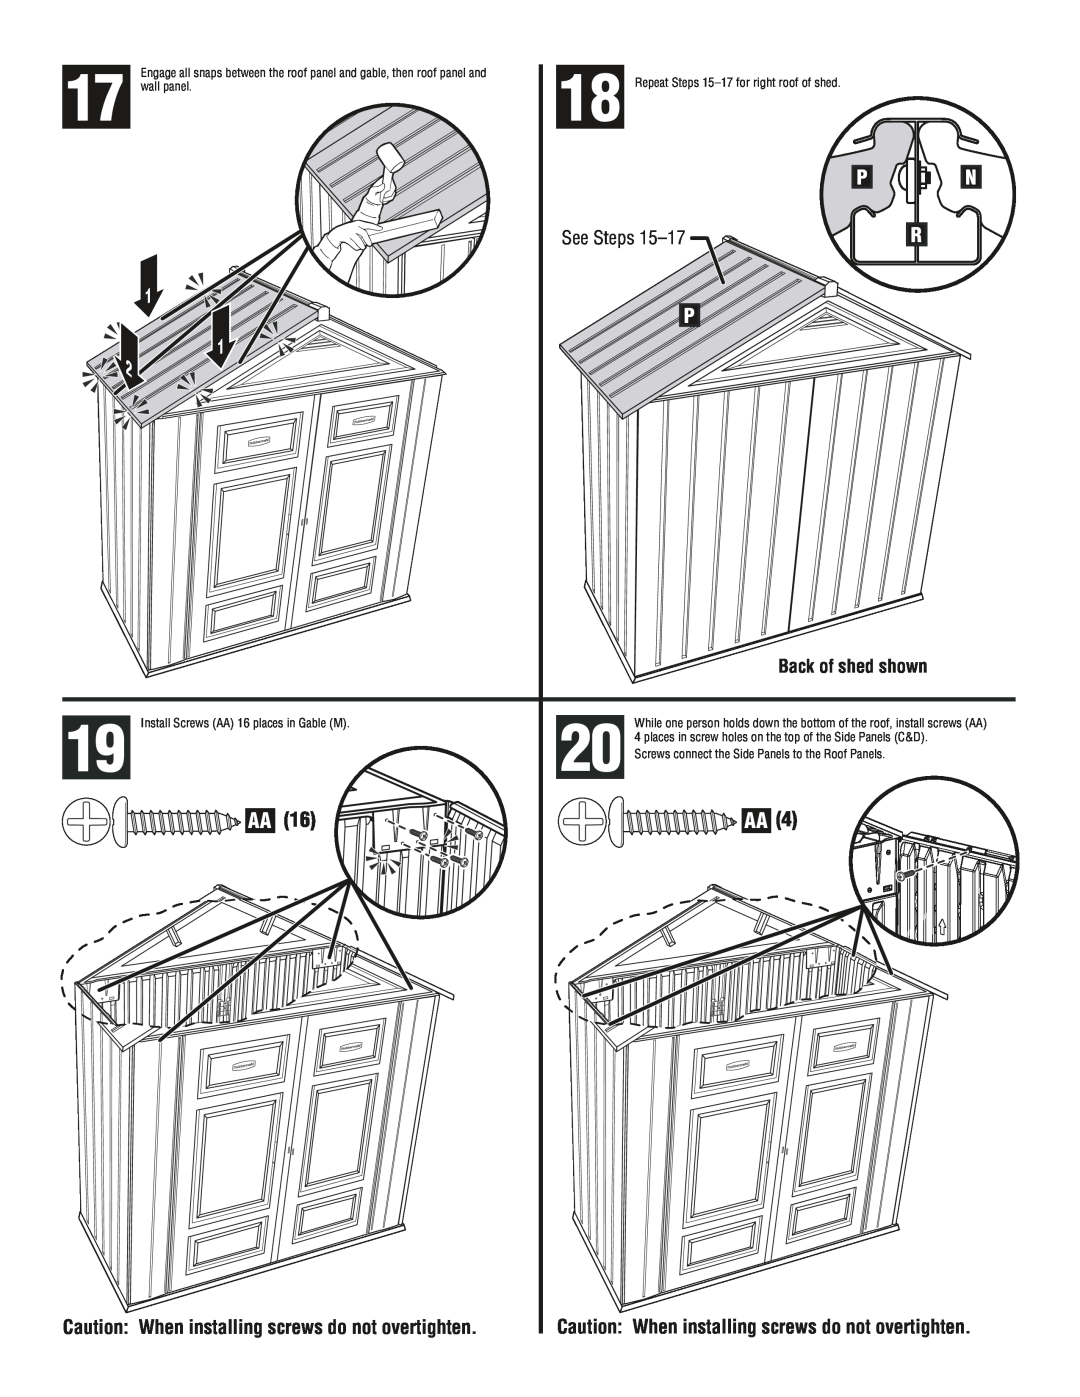 Rubbermaid 1S85 manual Caution When installing screws do not overtighten, See Steps, Back of shed shown 